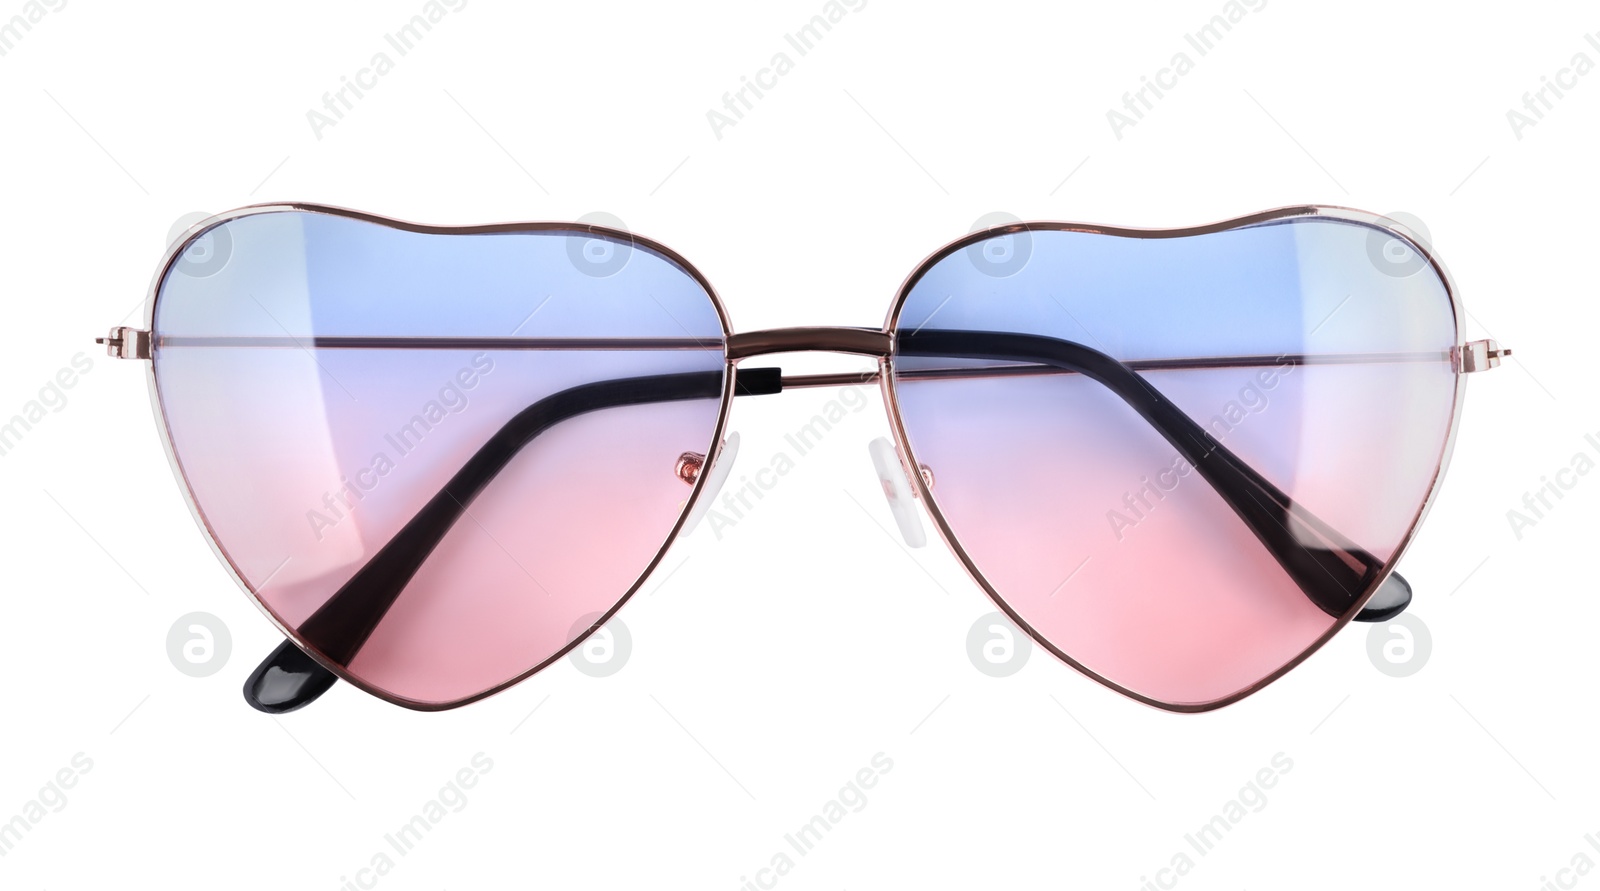 Photo of Heart shaped sunglasses isolated on white, top view